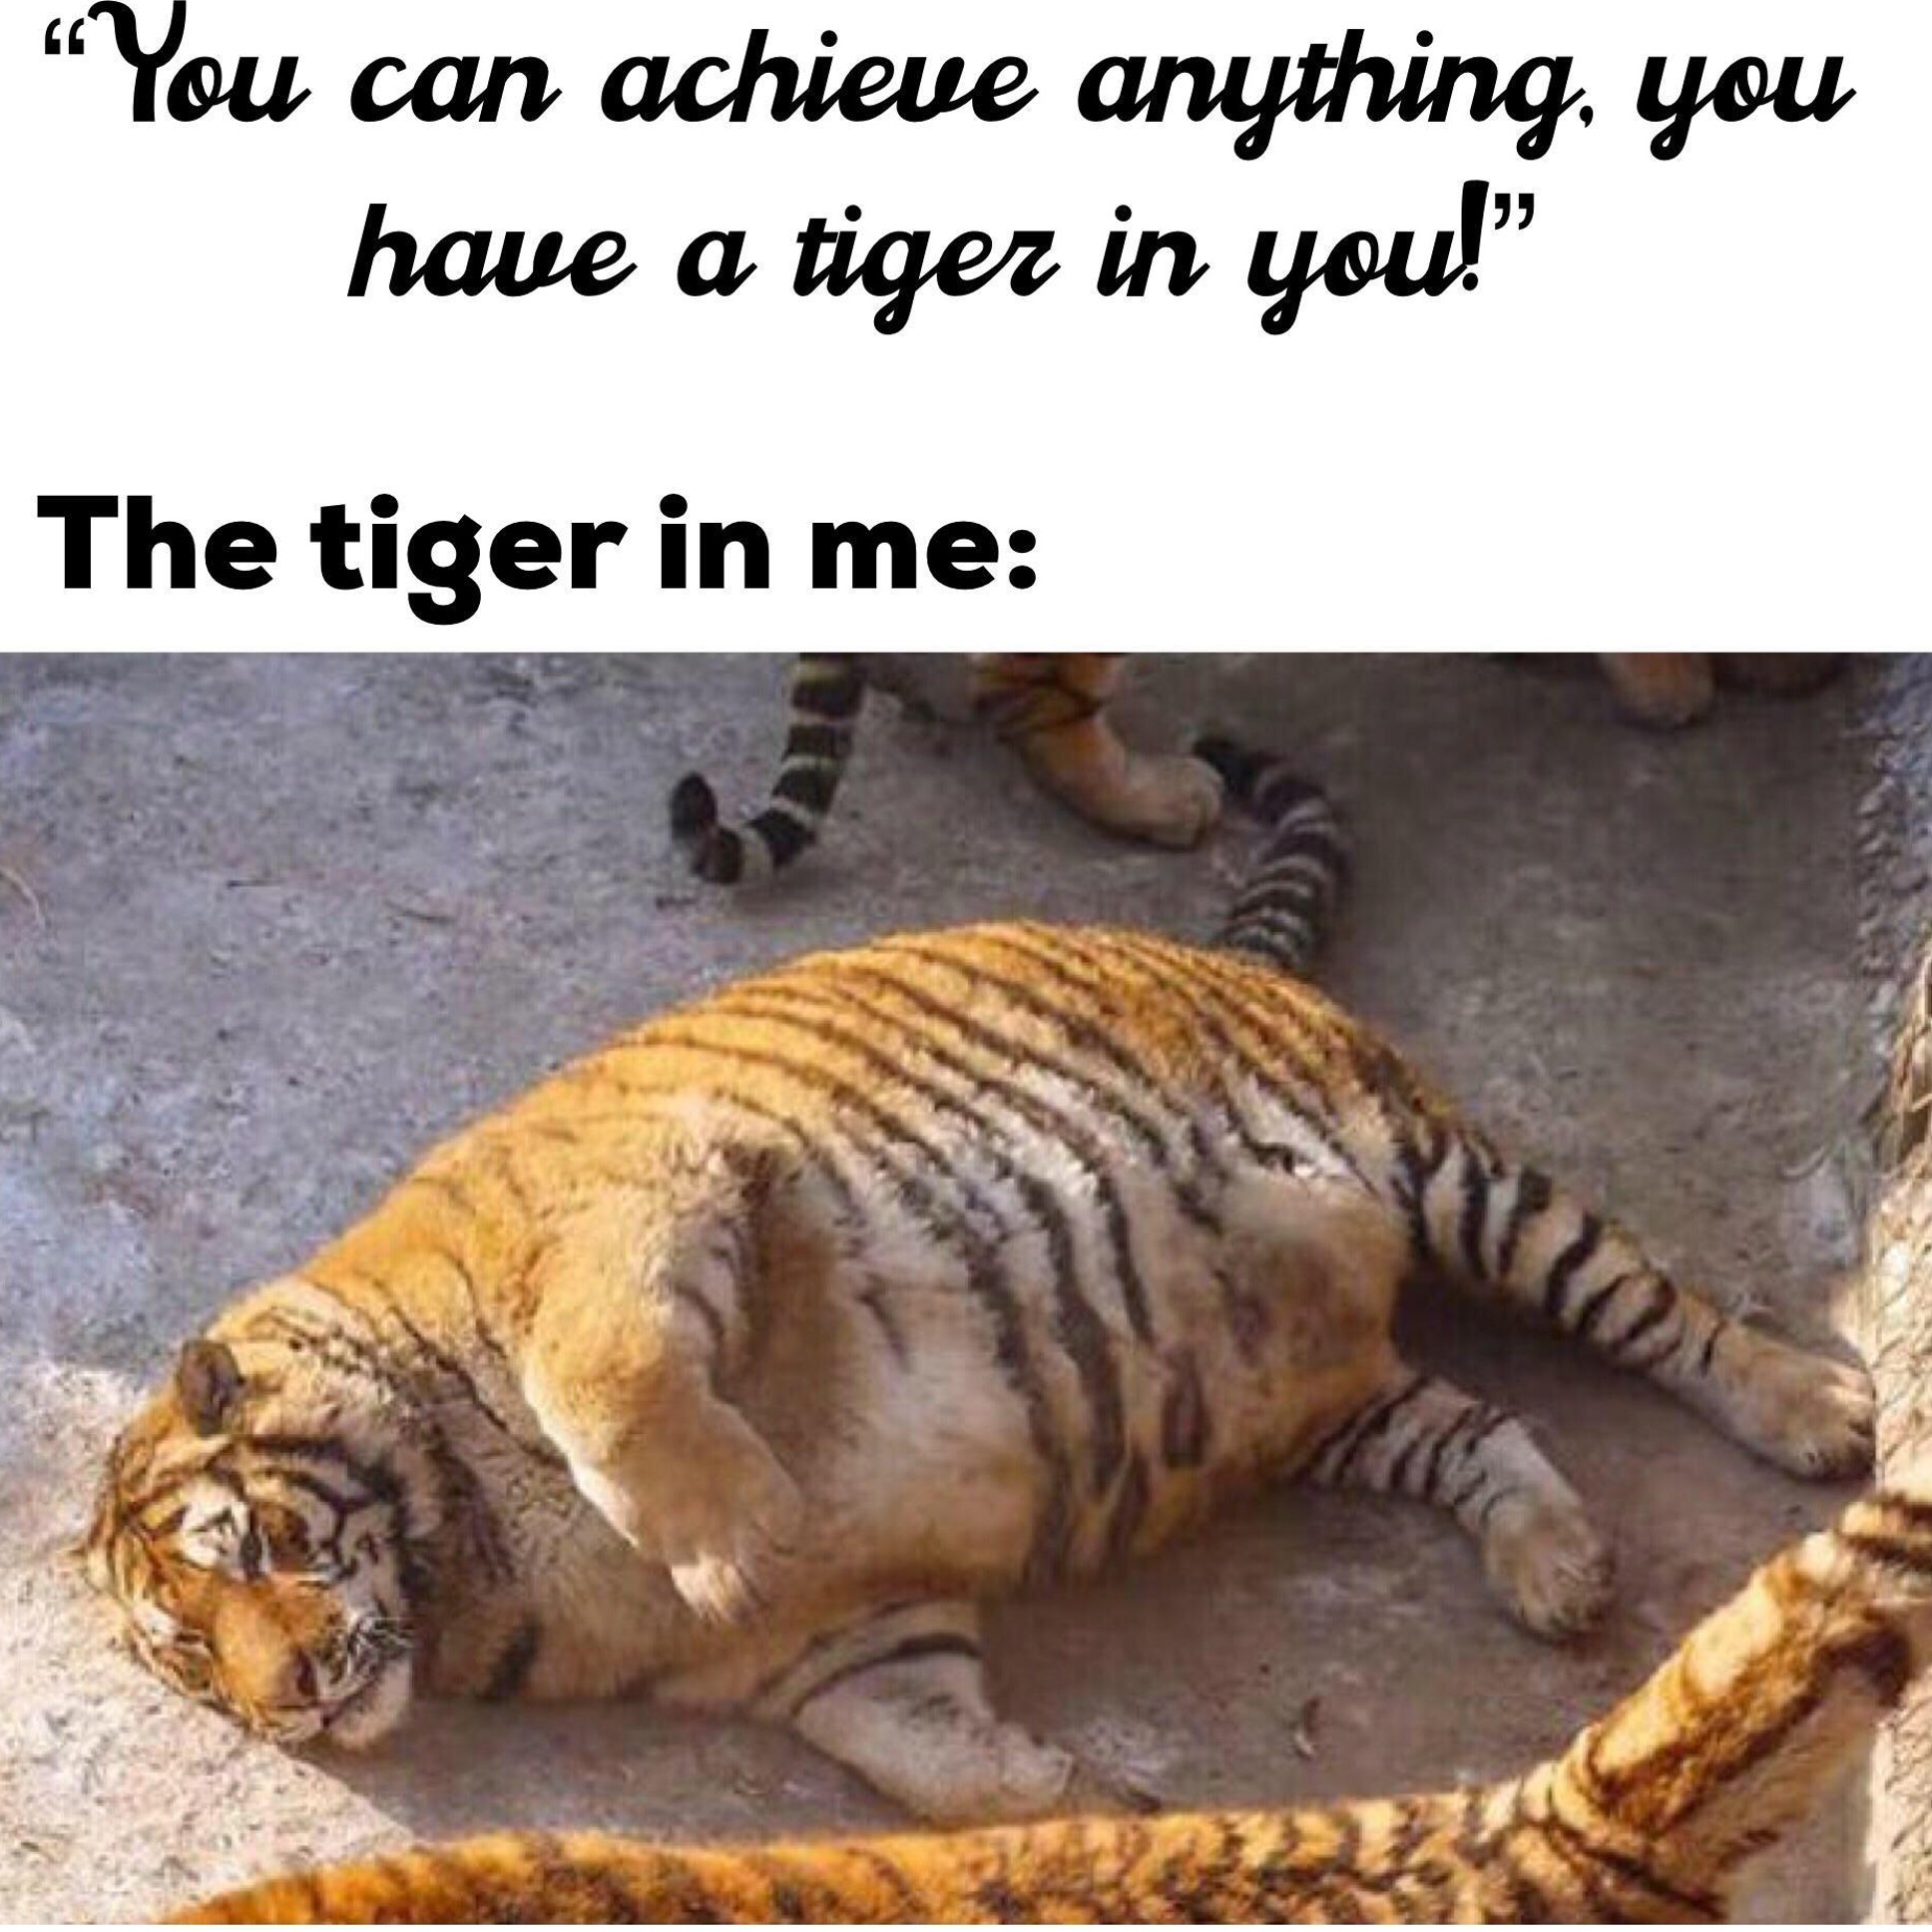 funny memes - tiger in me meme - "You can achieve anything, you have a tiger in you!" The tiger in me